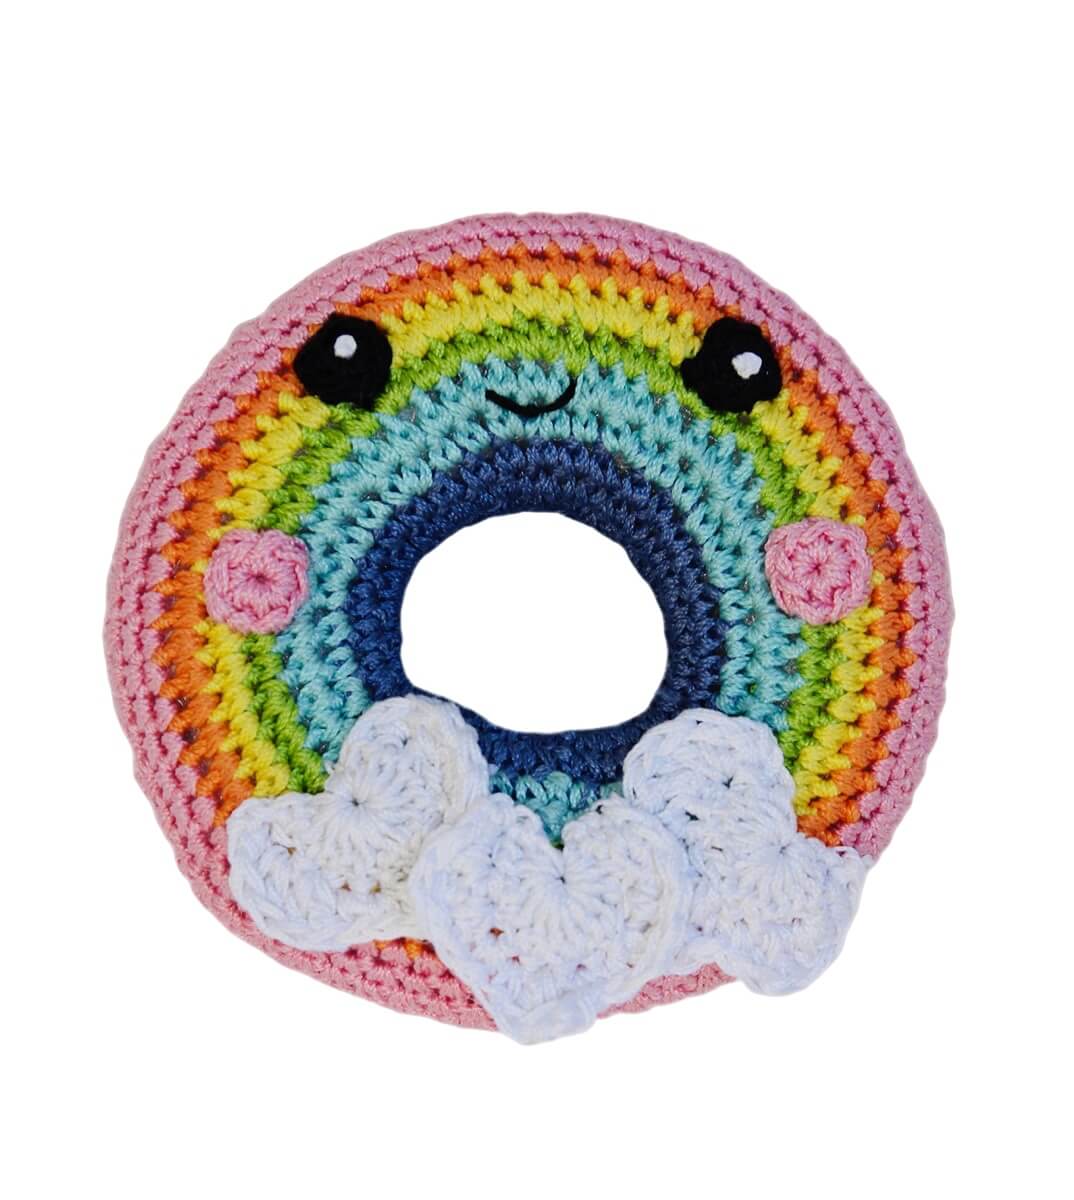 Knit Knacks &quot;Rainbow Donut&quot; handmade organic cotton dog toy. Anthropomorphic donut with a smiling face, rosy cheeks, and heart accents.